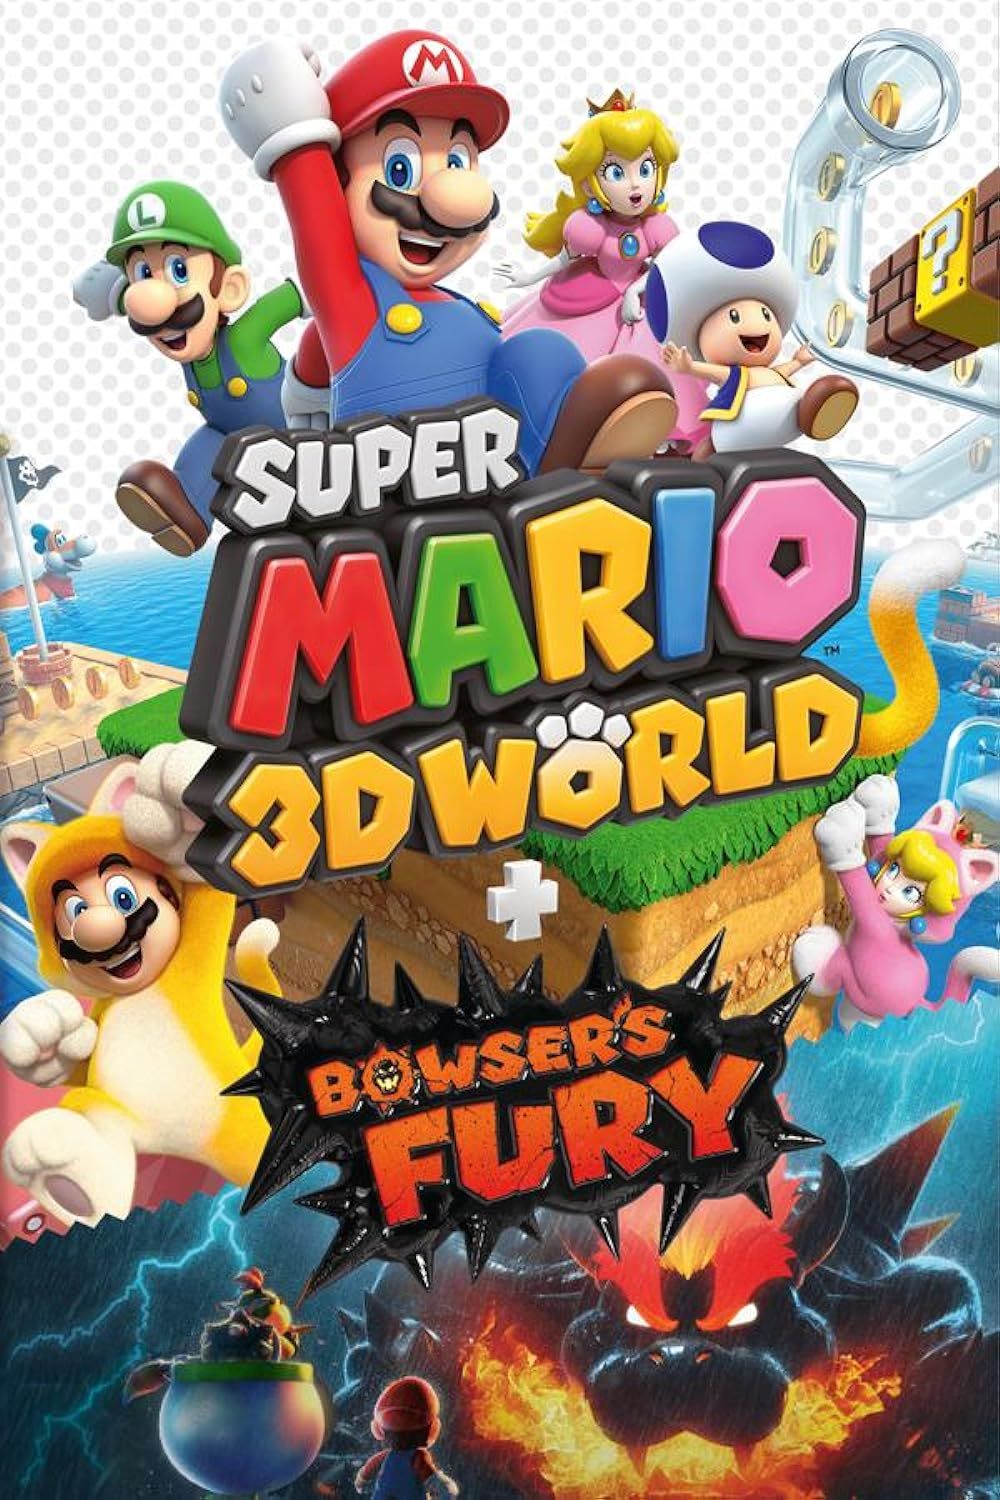 Every World in Super Mario 3D World